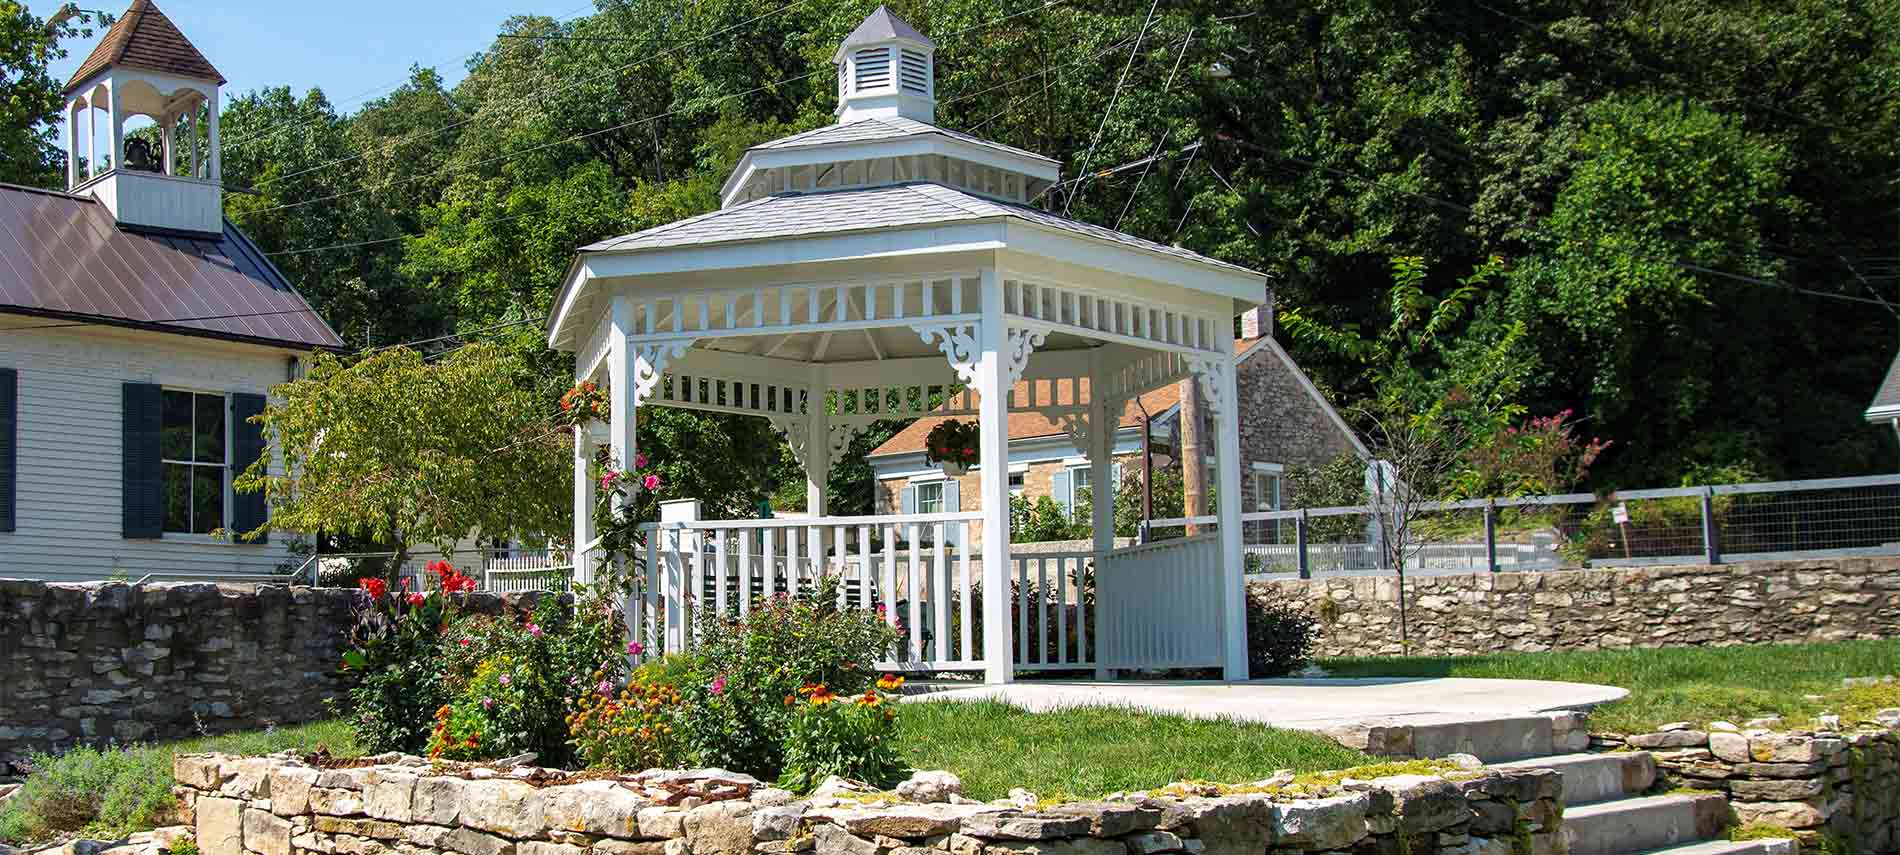 A stone lined raised gazebo with turret top and decorative sides outside the inn.